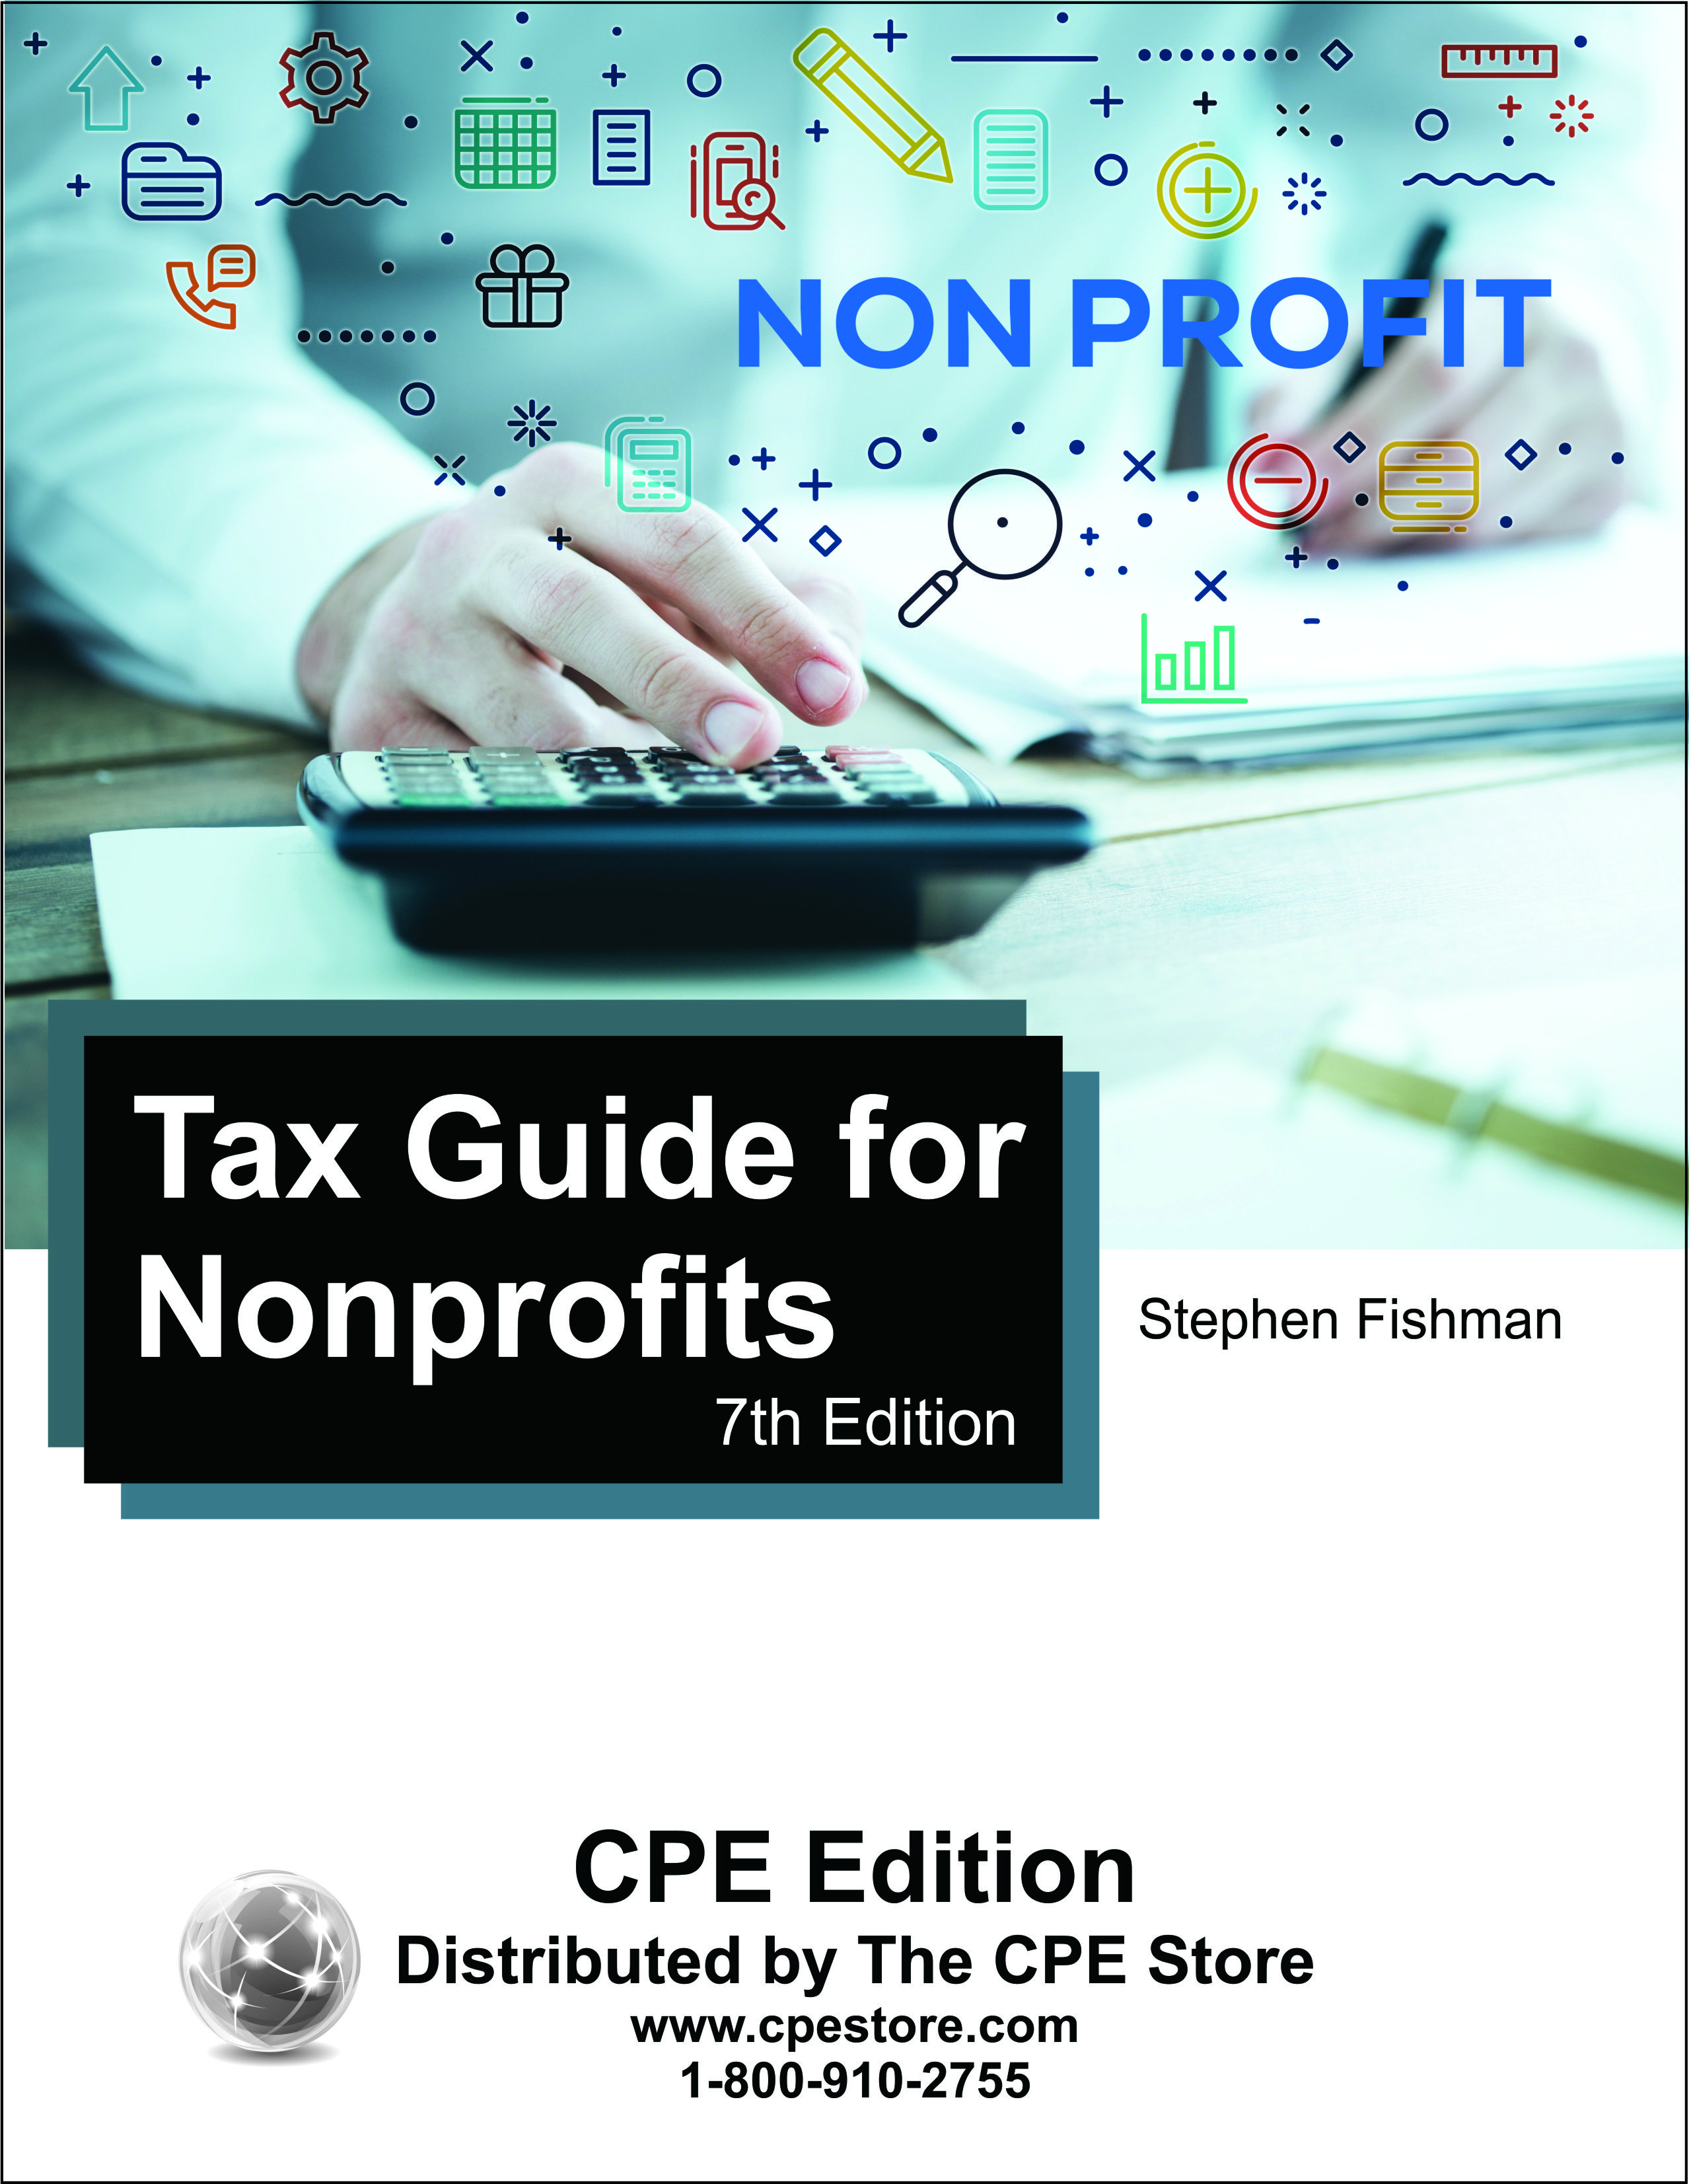 Tax Guide for Nonprofits